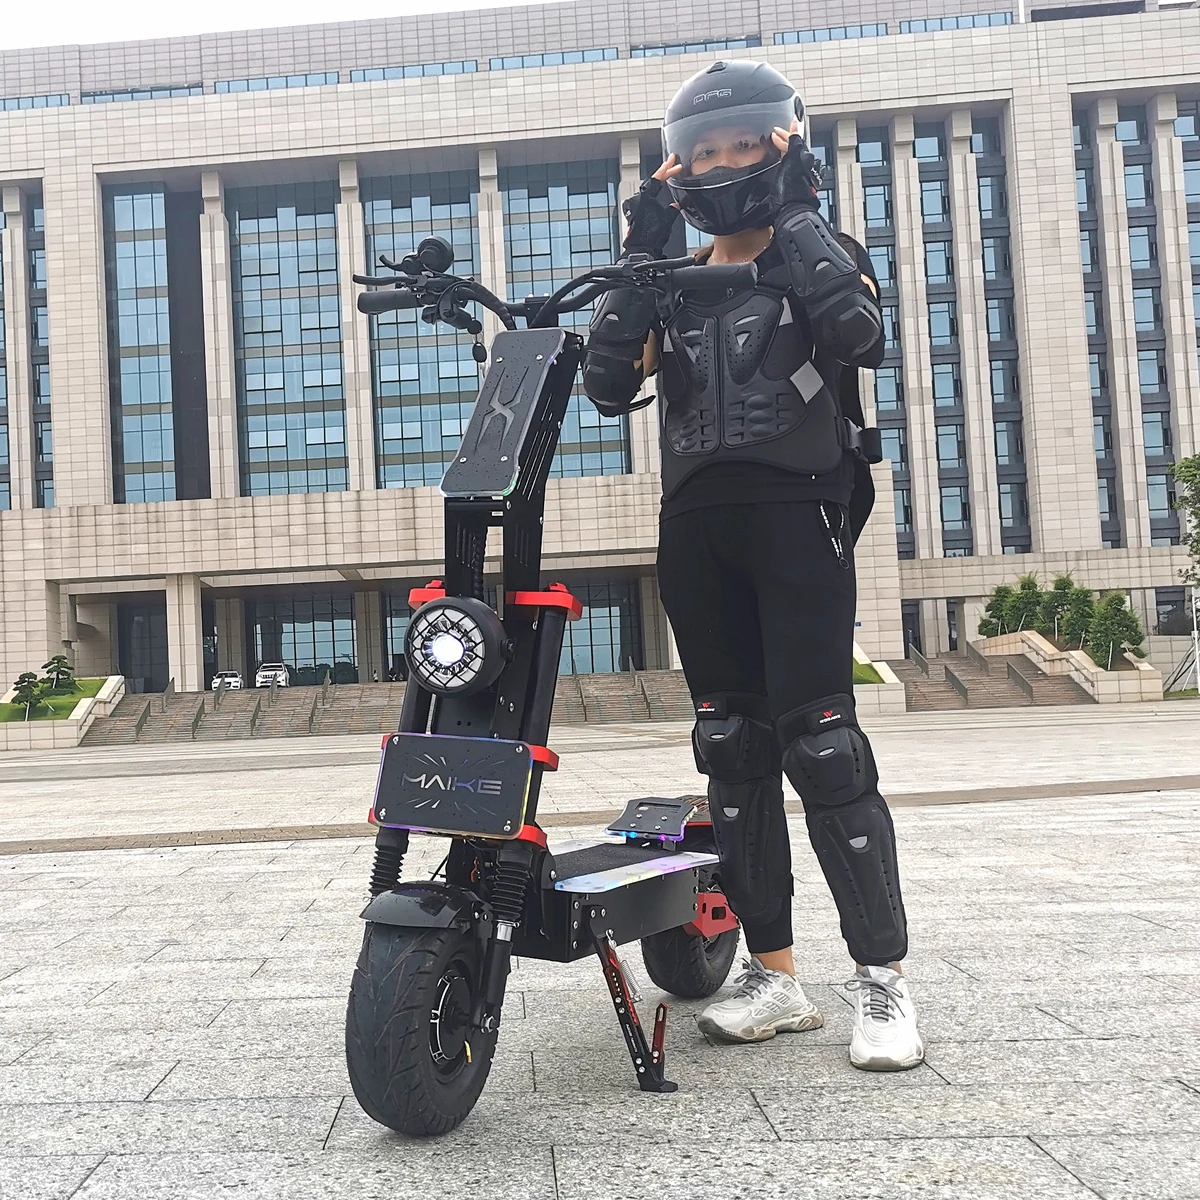 

Maike MKX Christmas gift powerful fat tire e scooter dual motor 30ah 8000w long range foldable electric scooter for adult